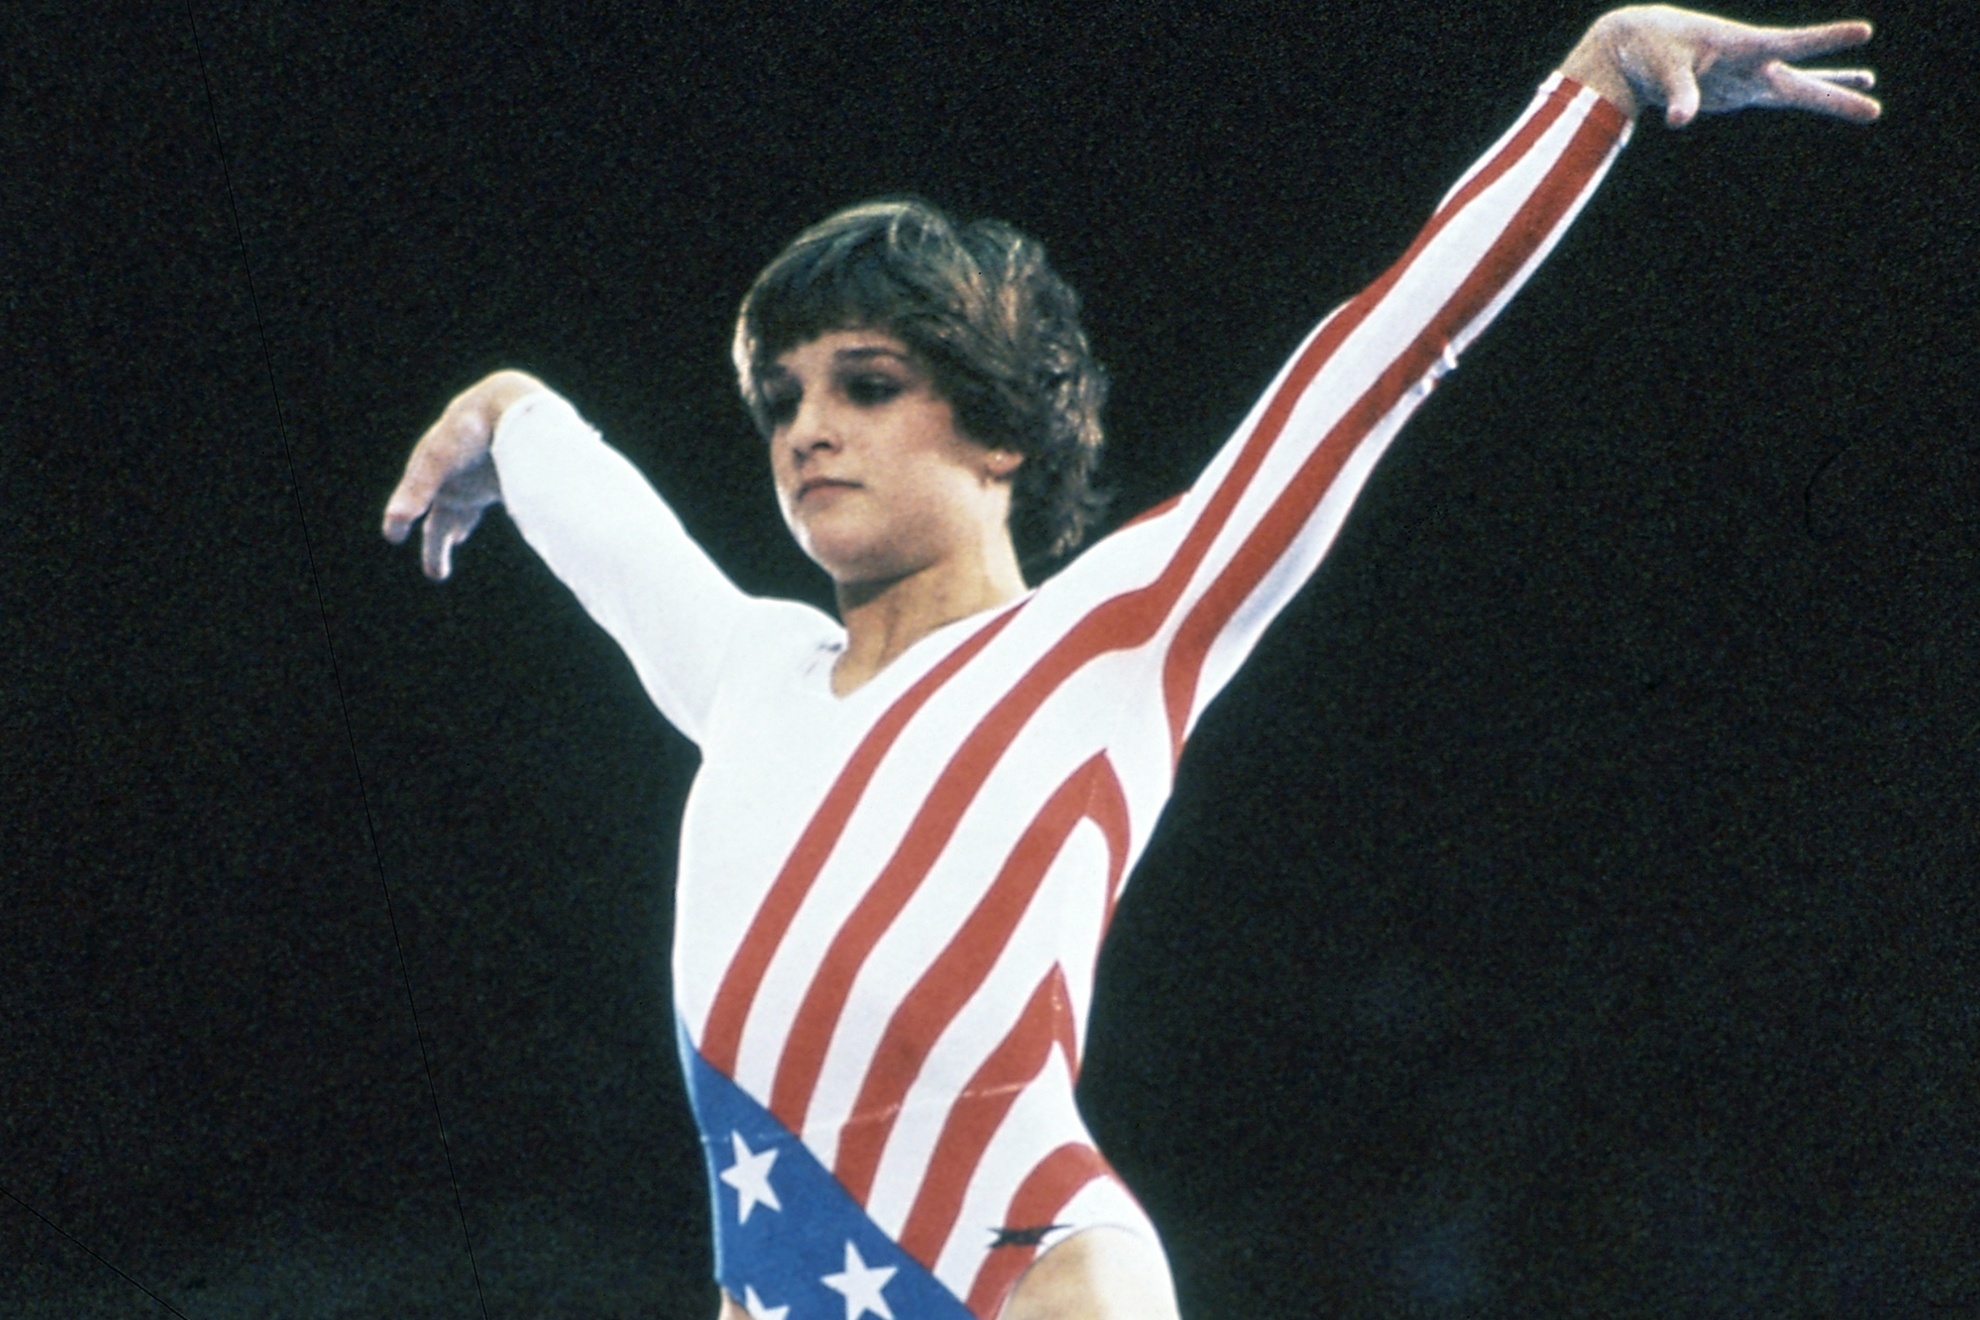 Gymnastic legend Mary Lou Retton at the Los Angeles 1984 Olympic Games.